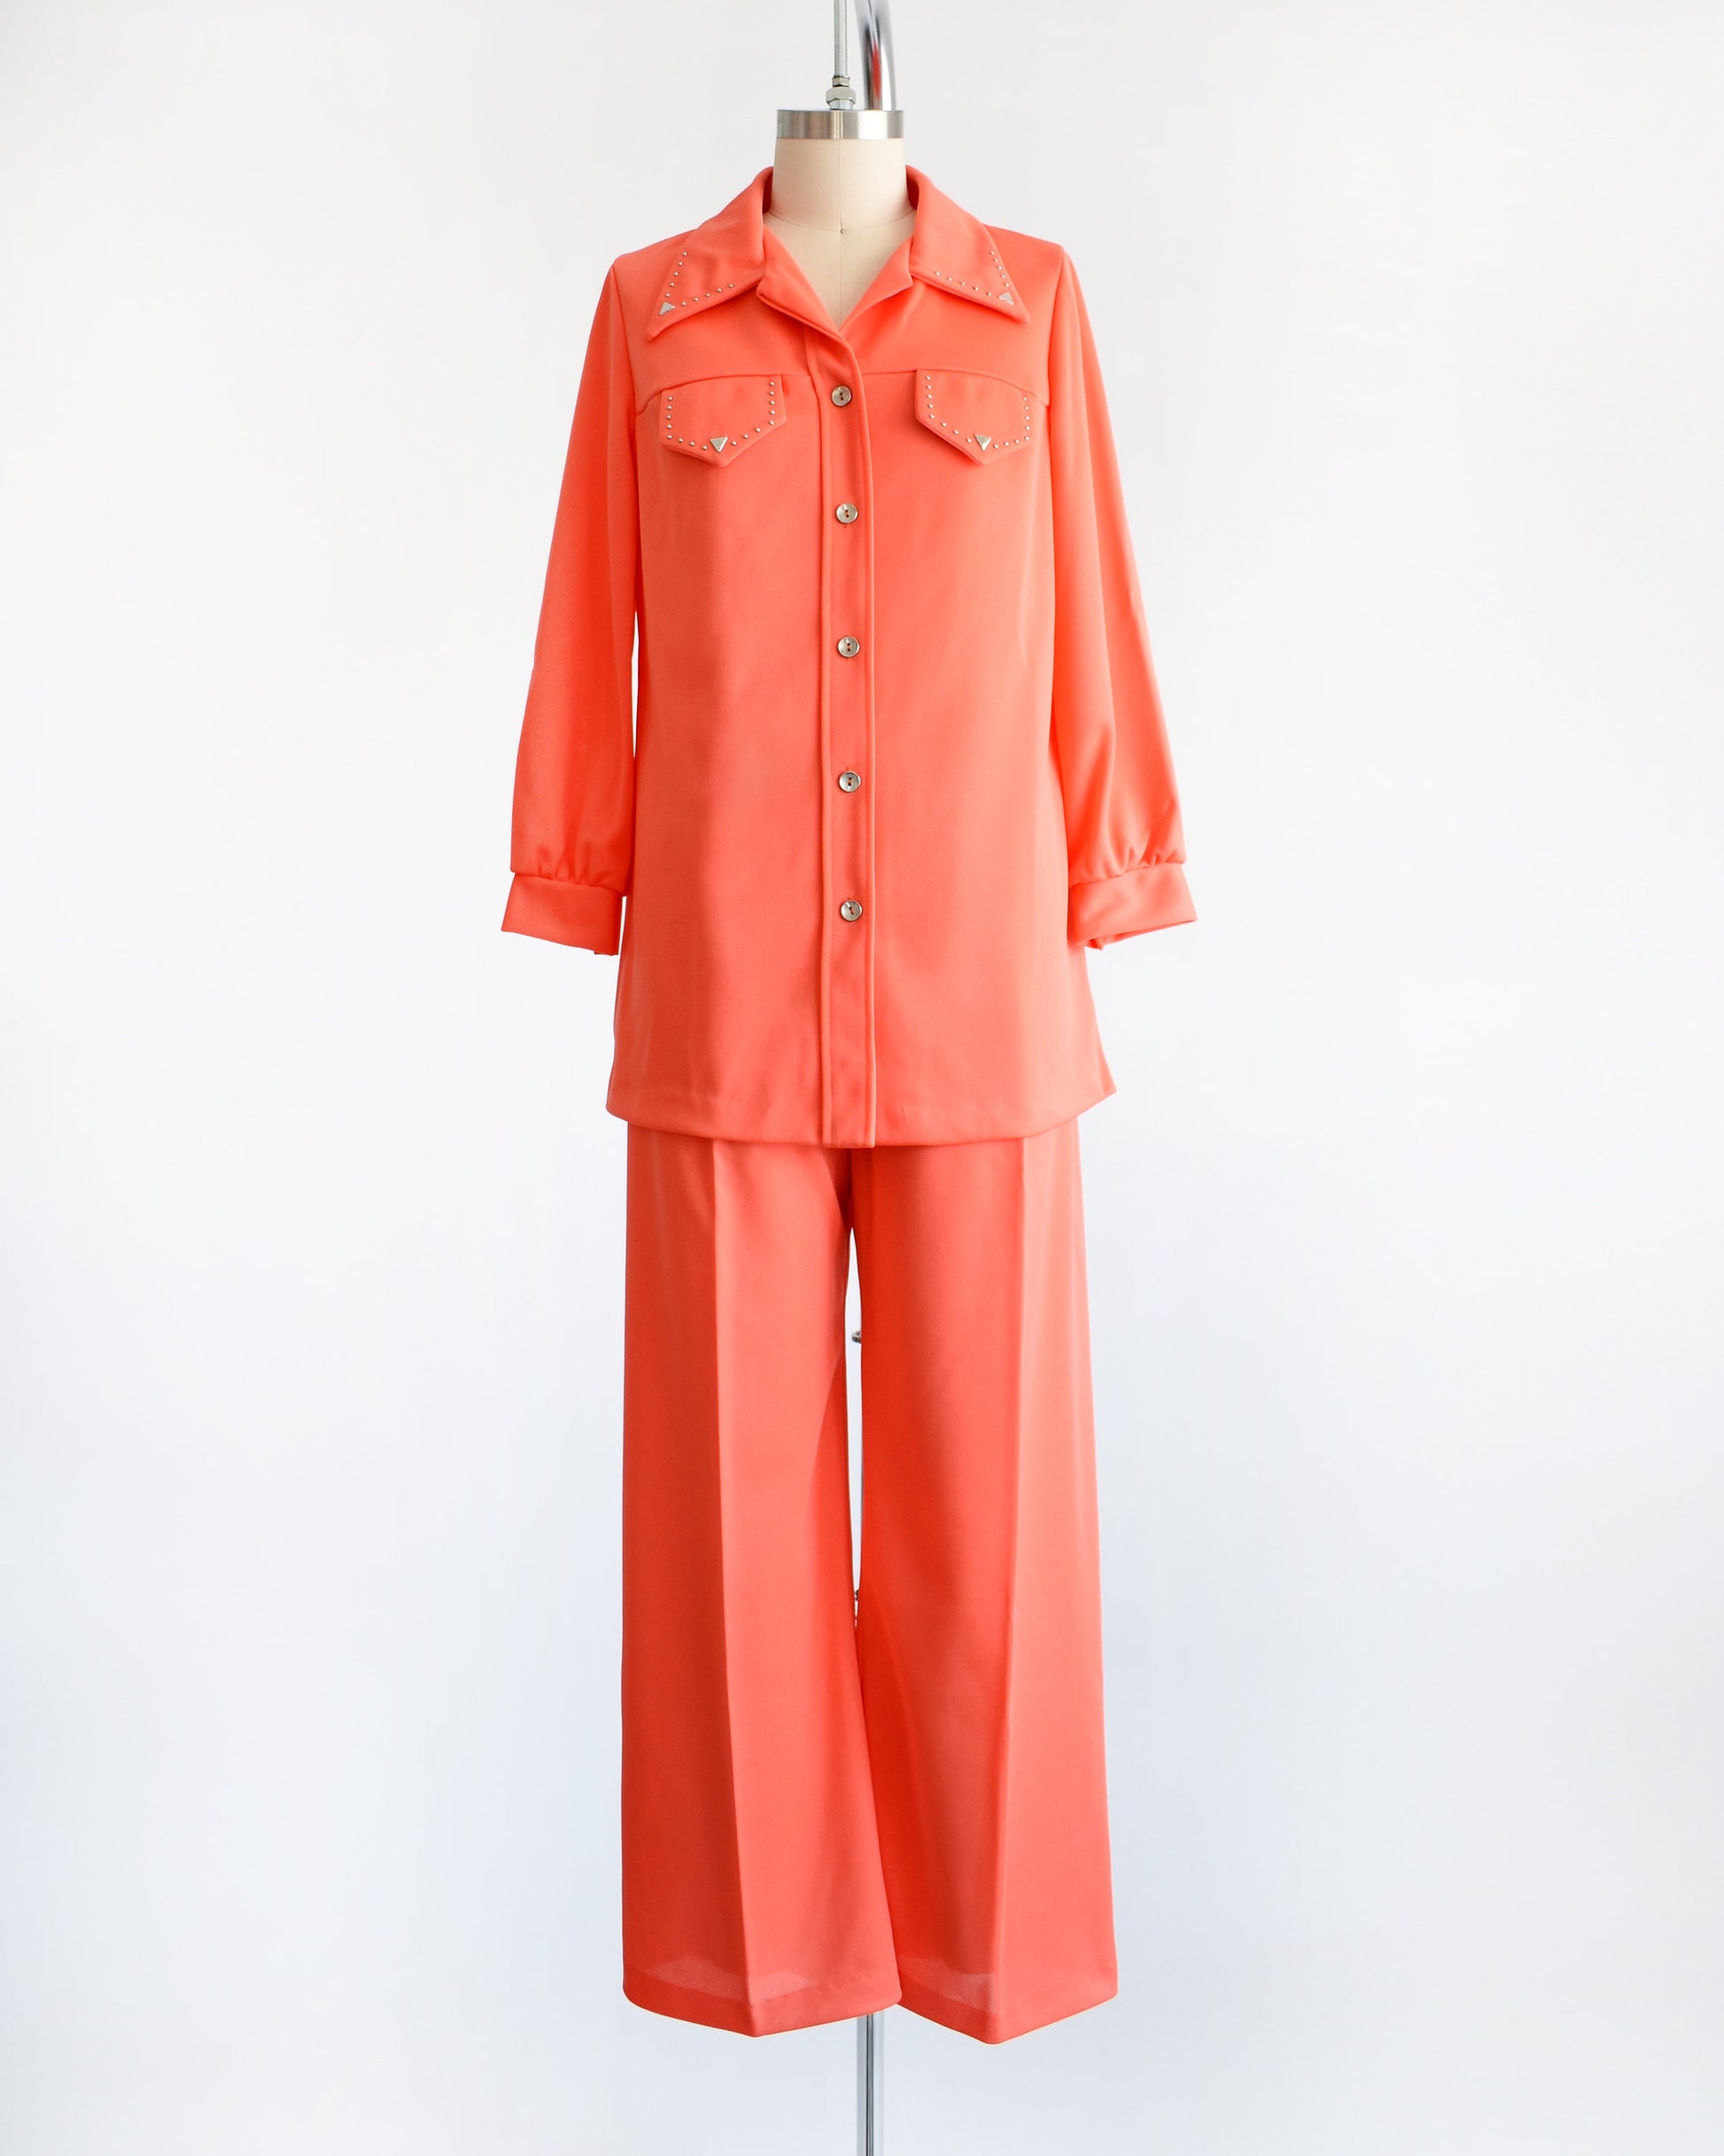 vintage 70s orange matching blouse with silver studs with wide leg pants on a dress form